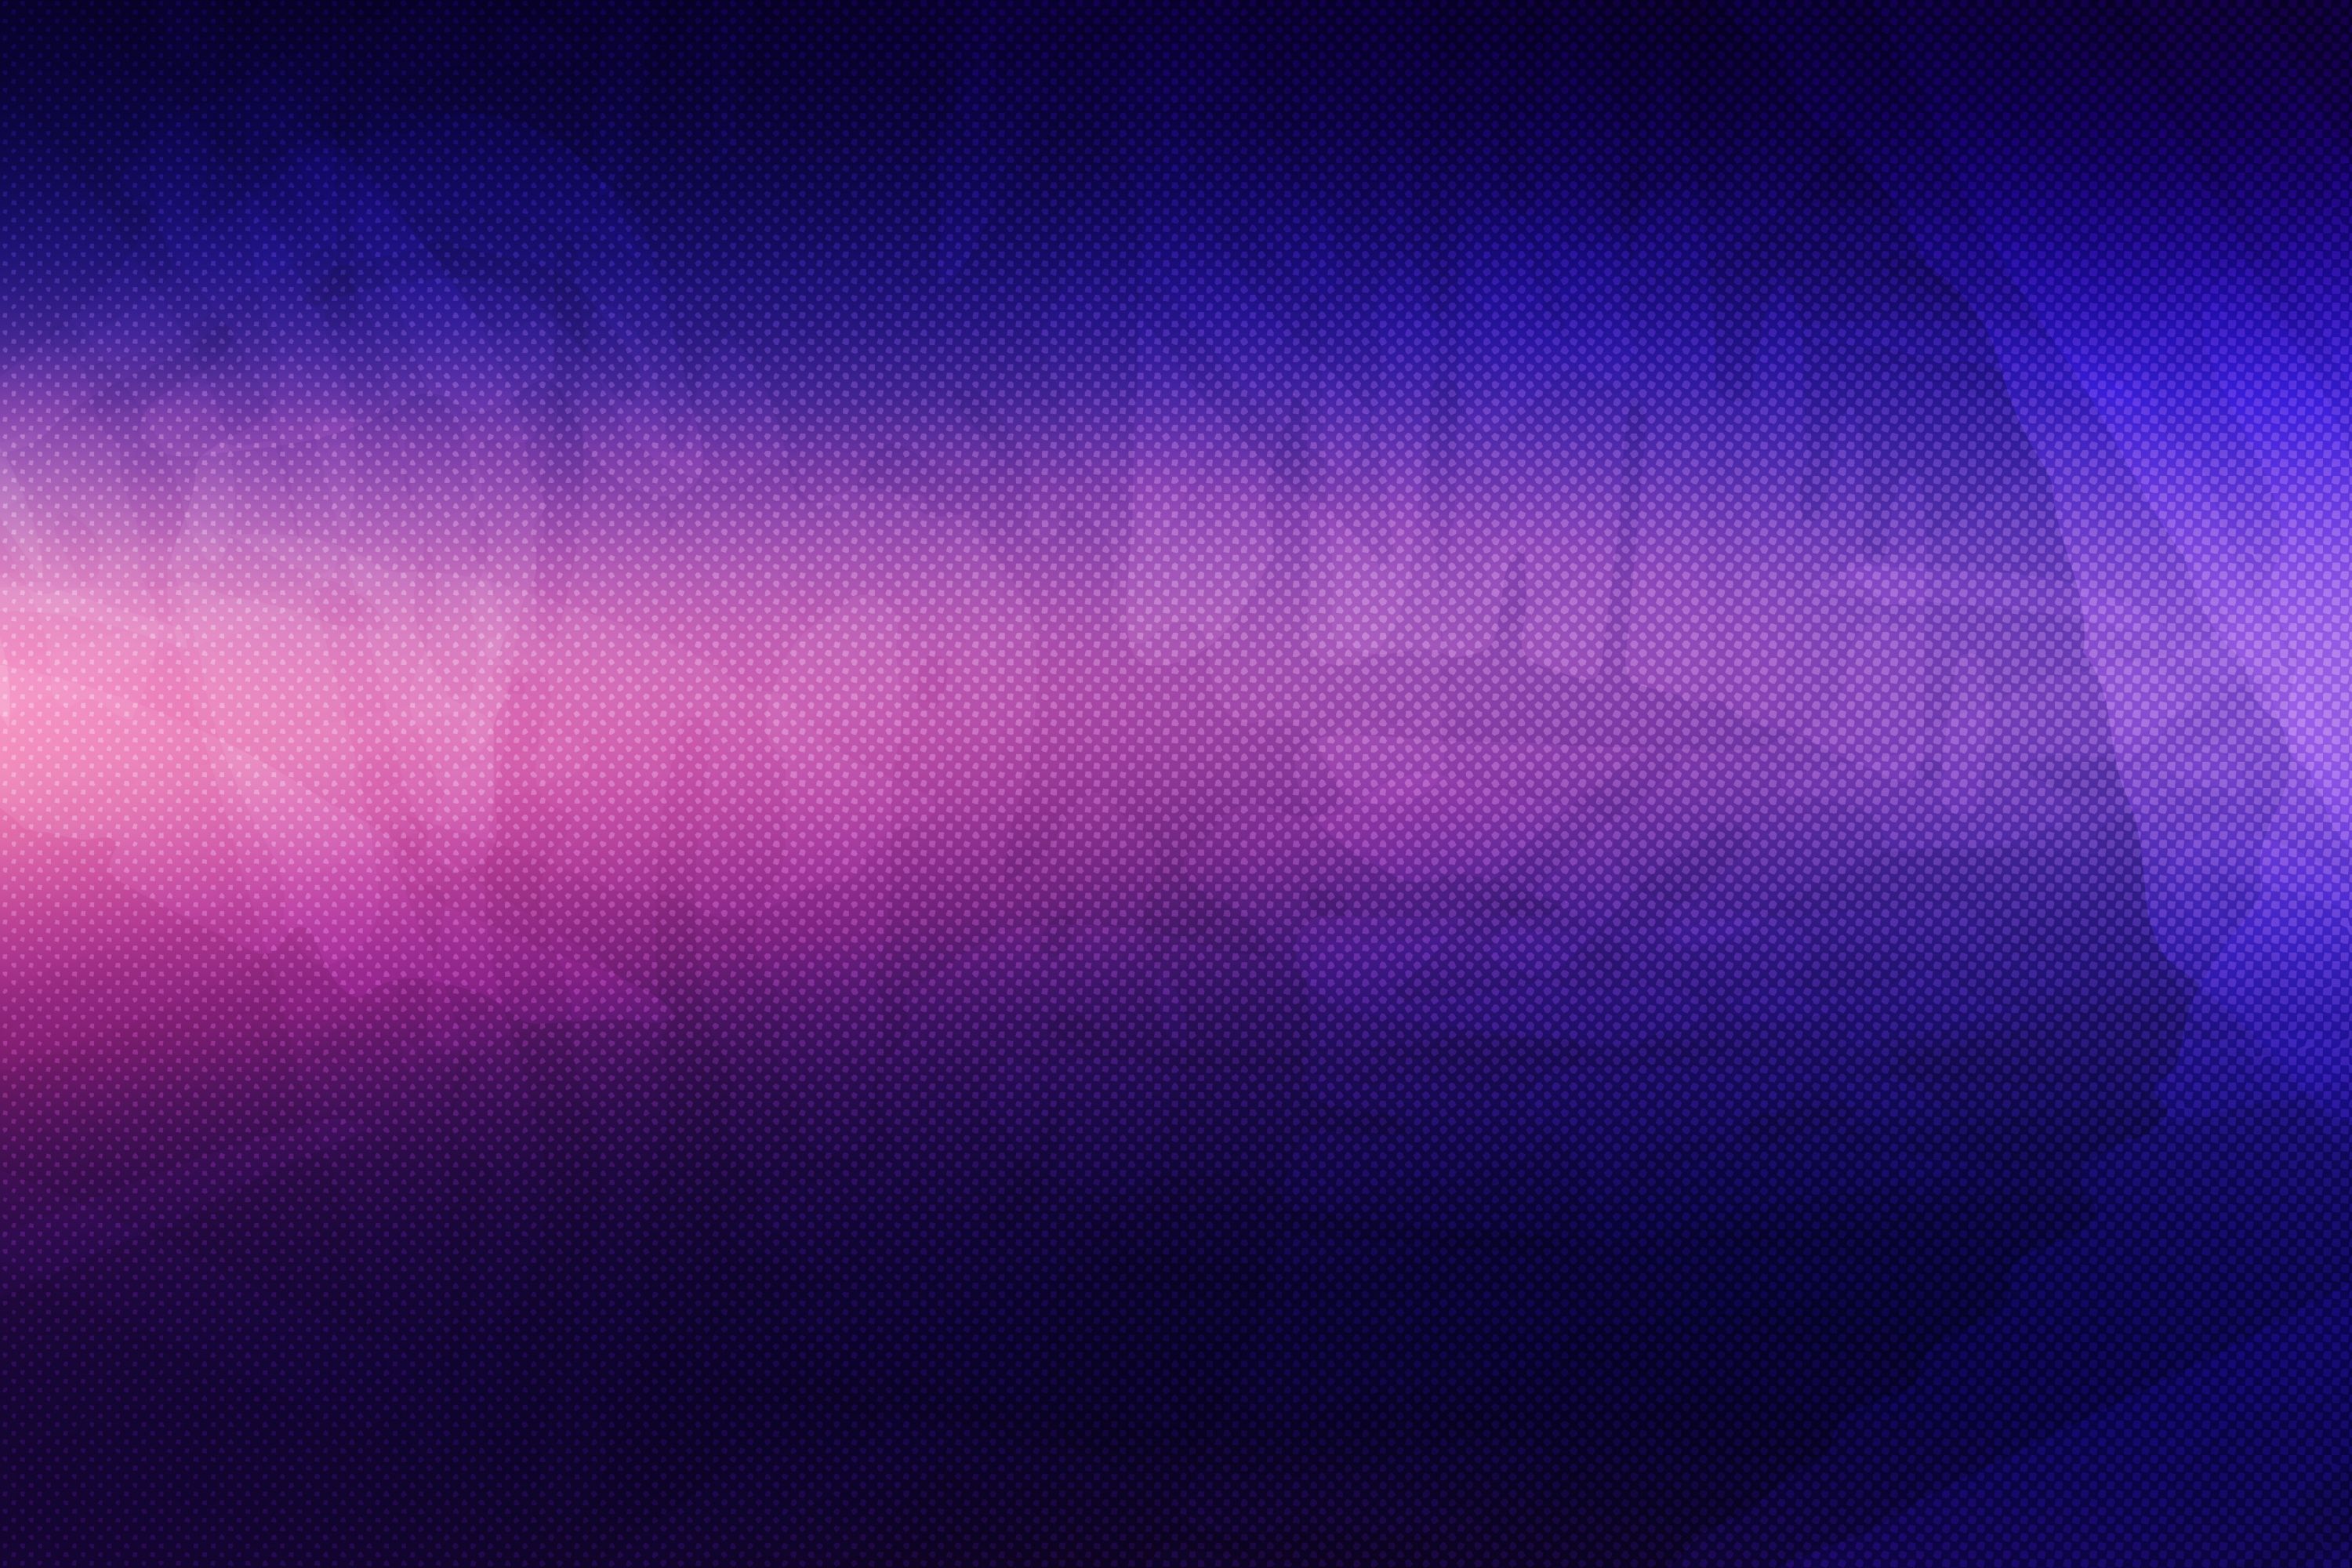 A purple and blue background with some light - Light purple, pastel purple